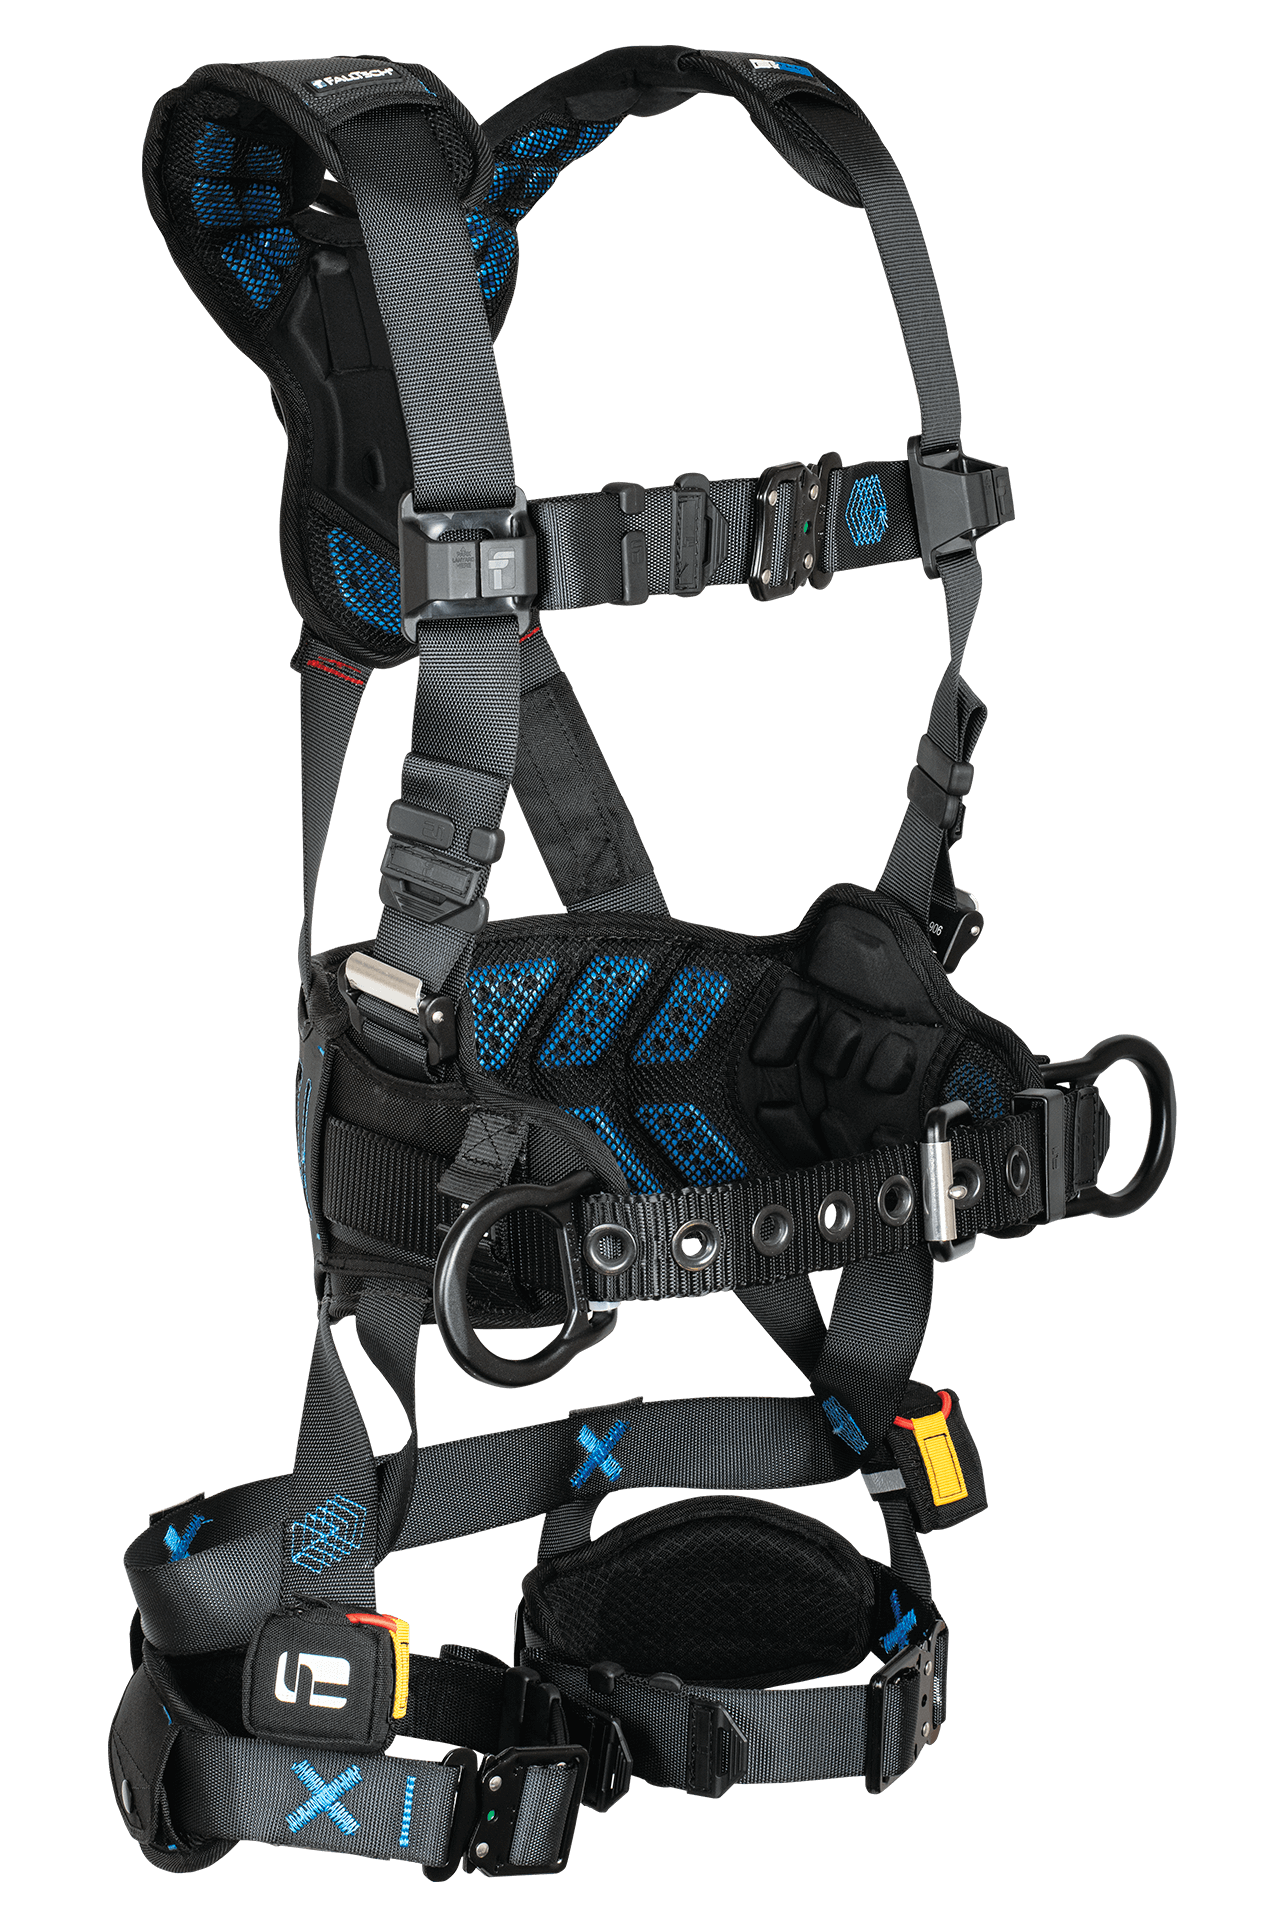 Falltech 8123BQCXS FT-One 3D Construction Belted Full Body Harness